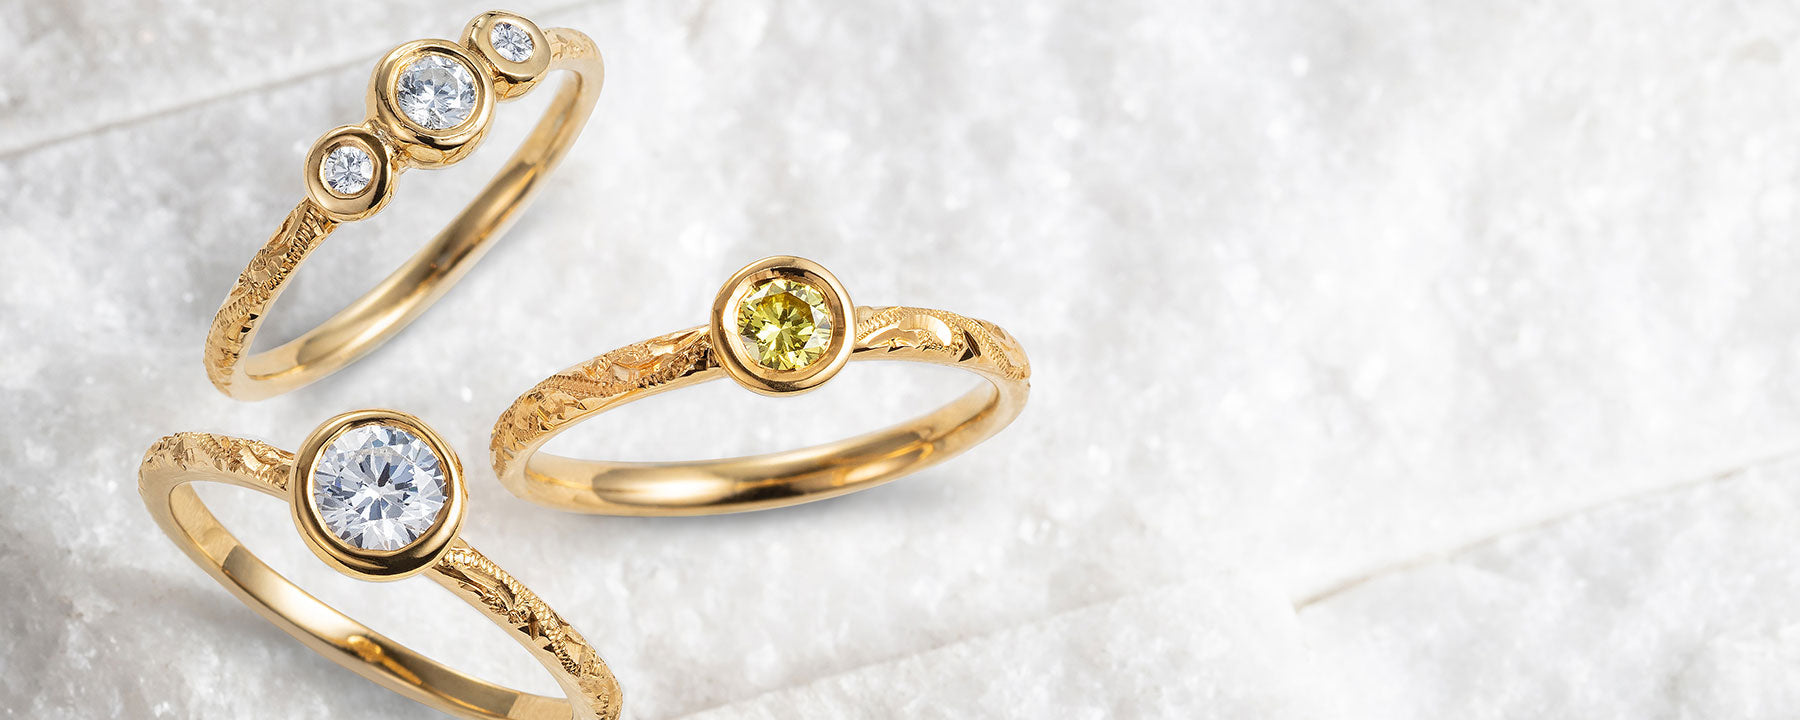 ETHICAL ENGAGEMENT RINGS